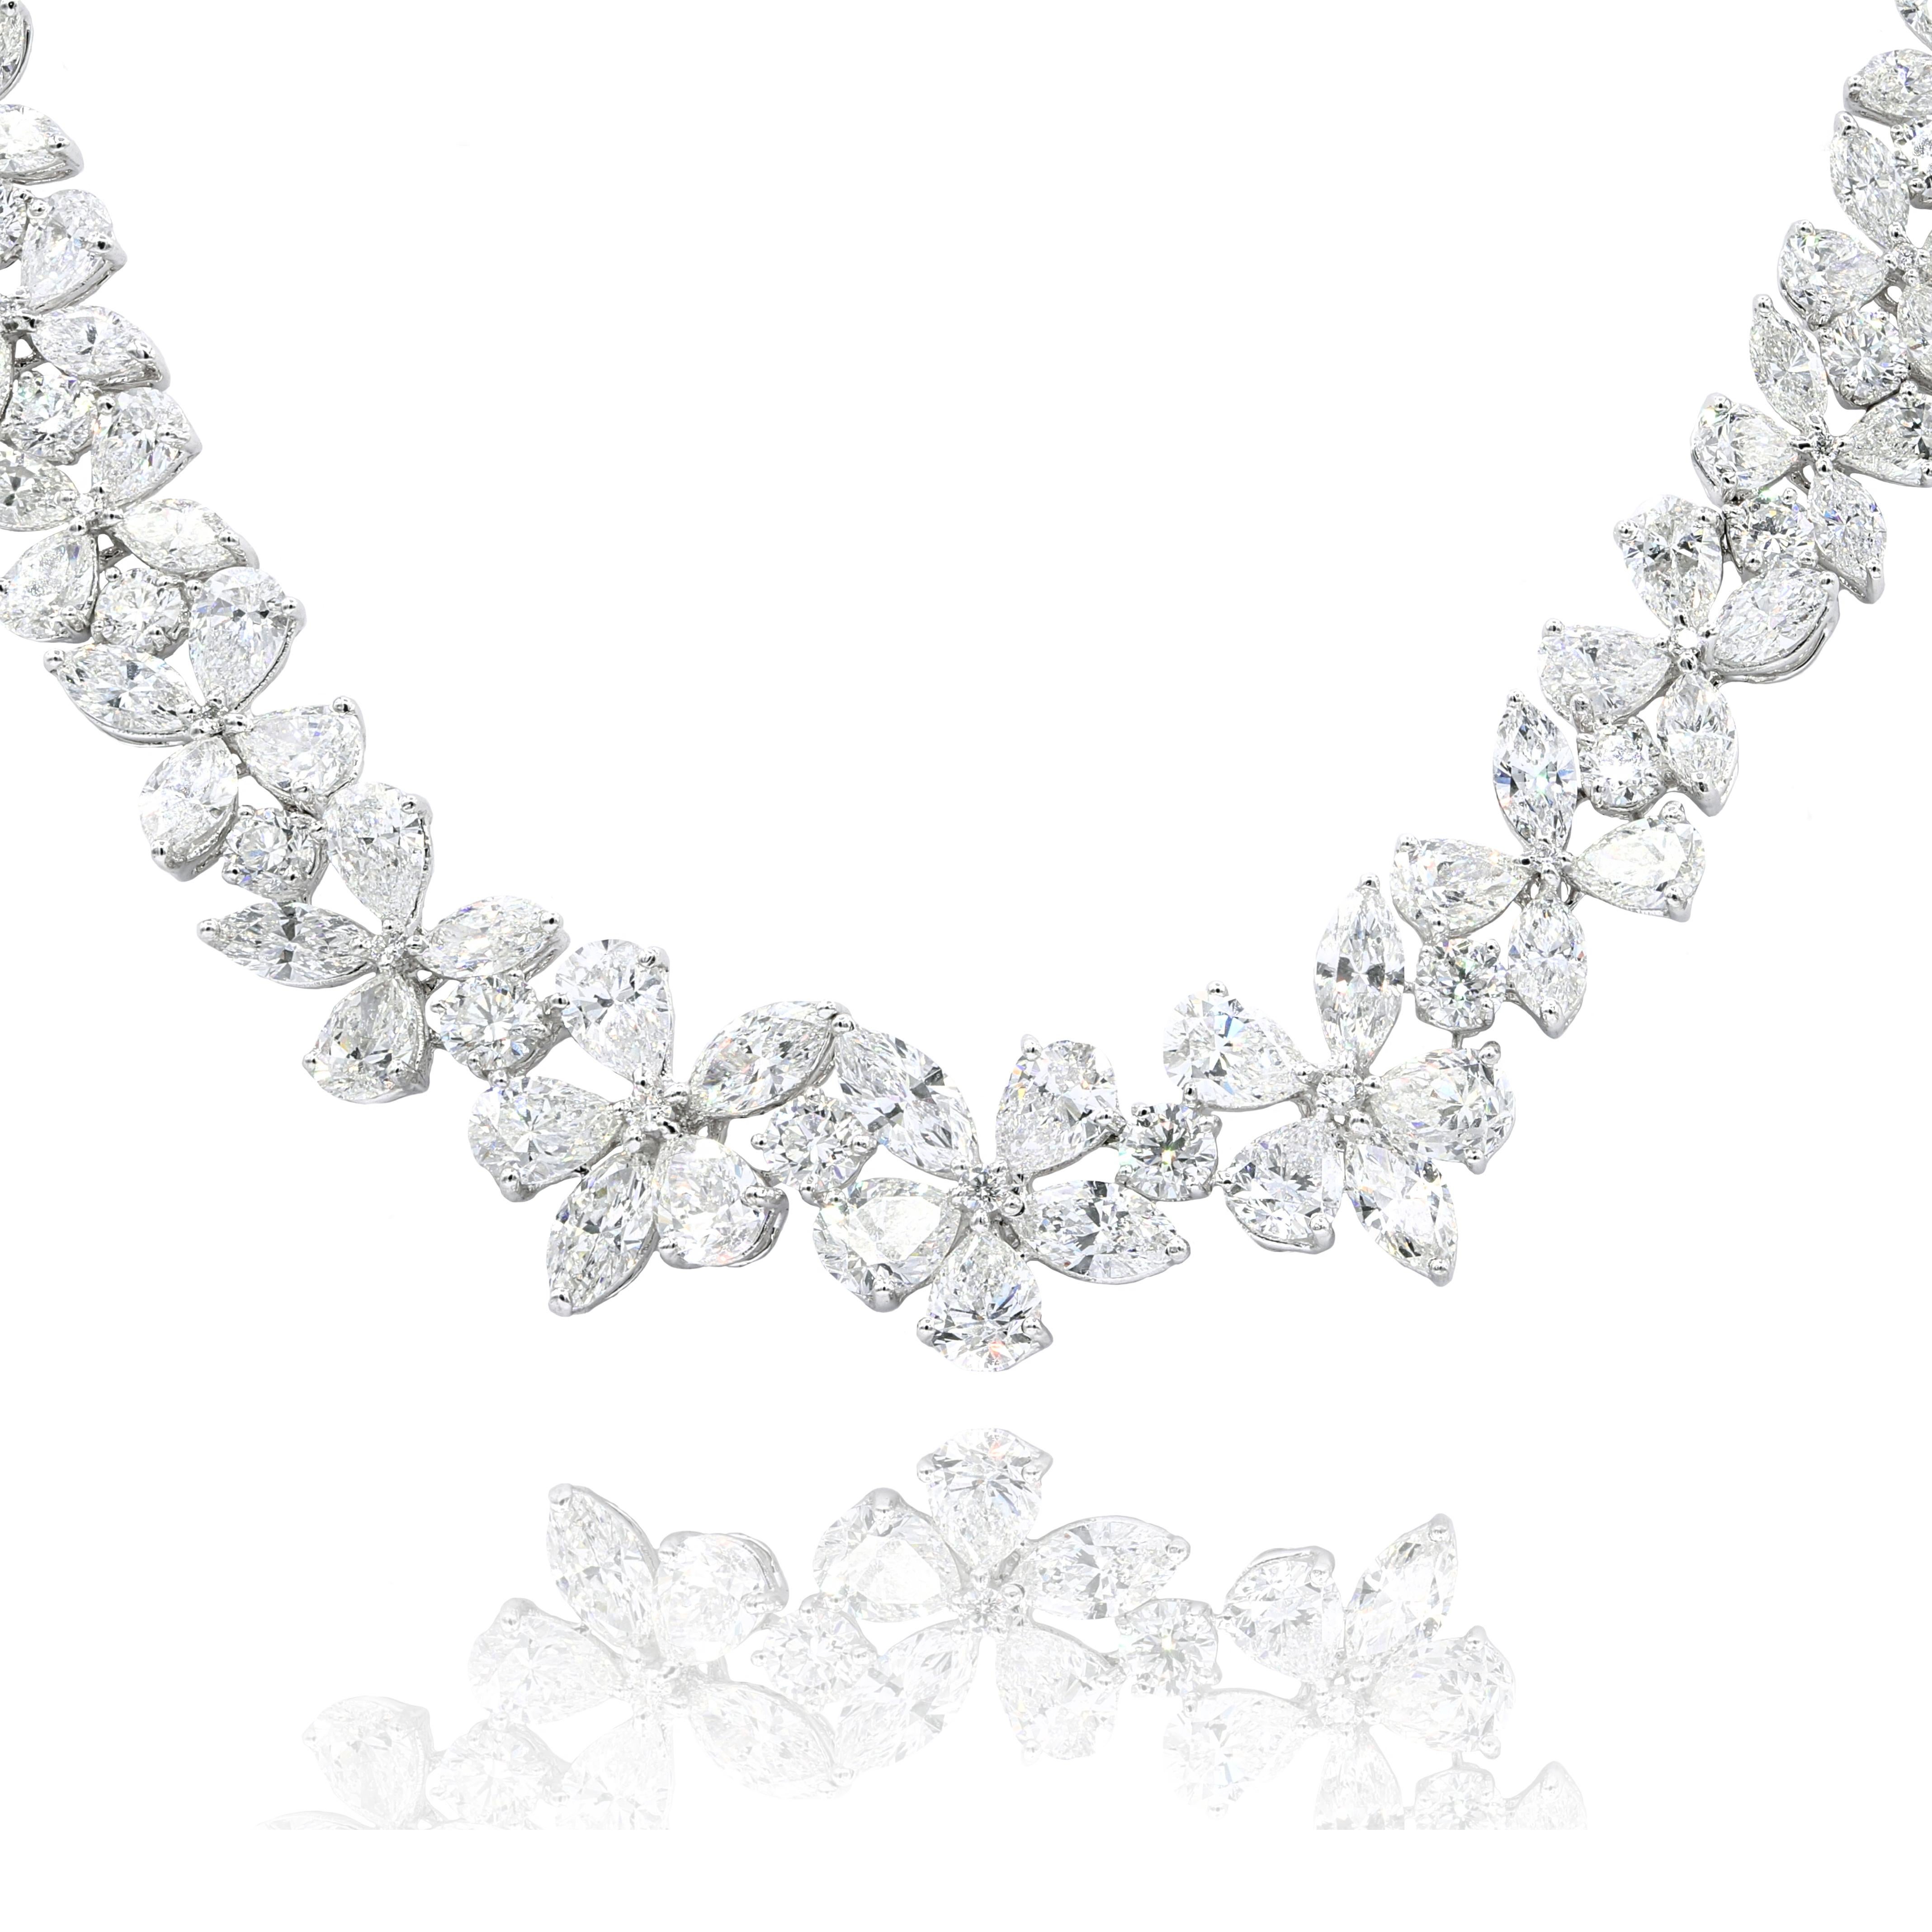 Platinum flower diamond necklace features 52.20 ct of round, marquise and pear shape diamonds